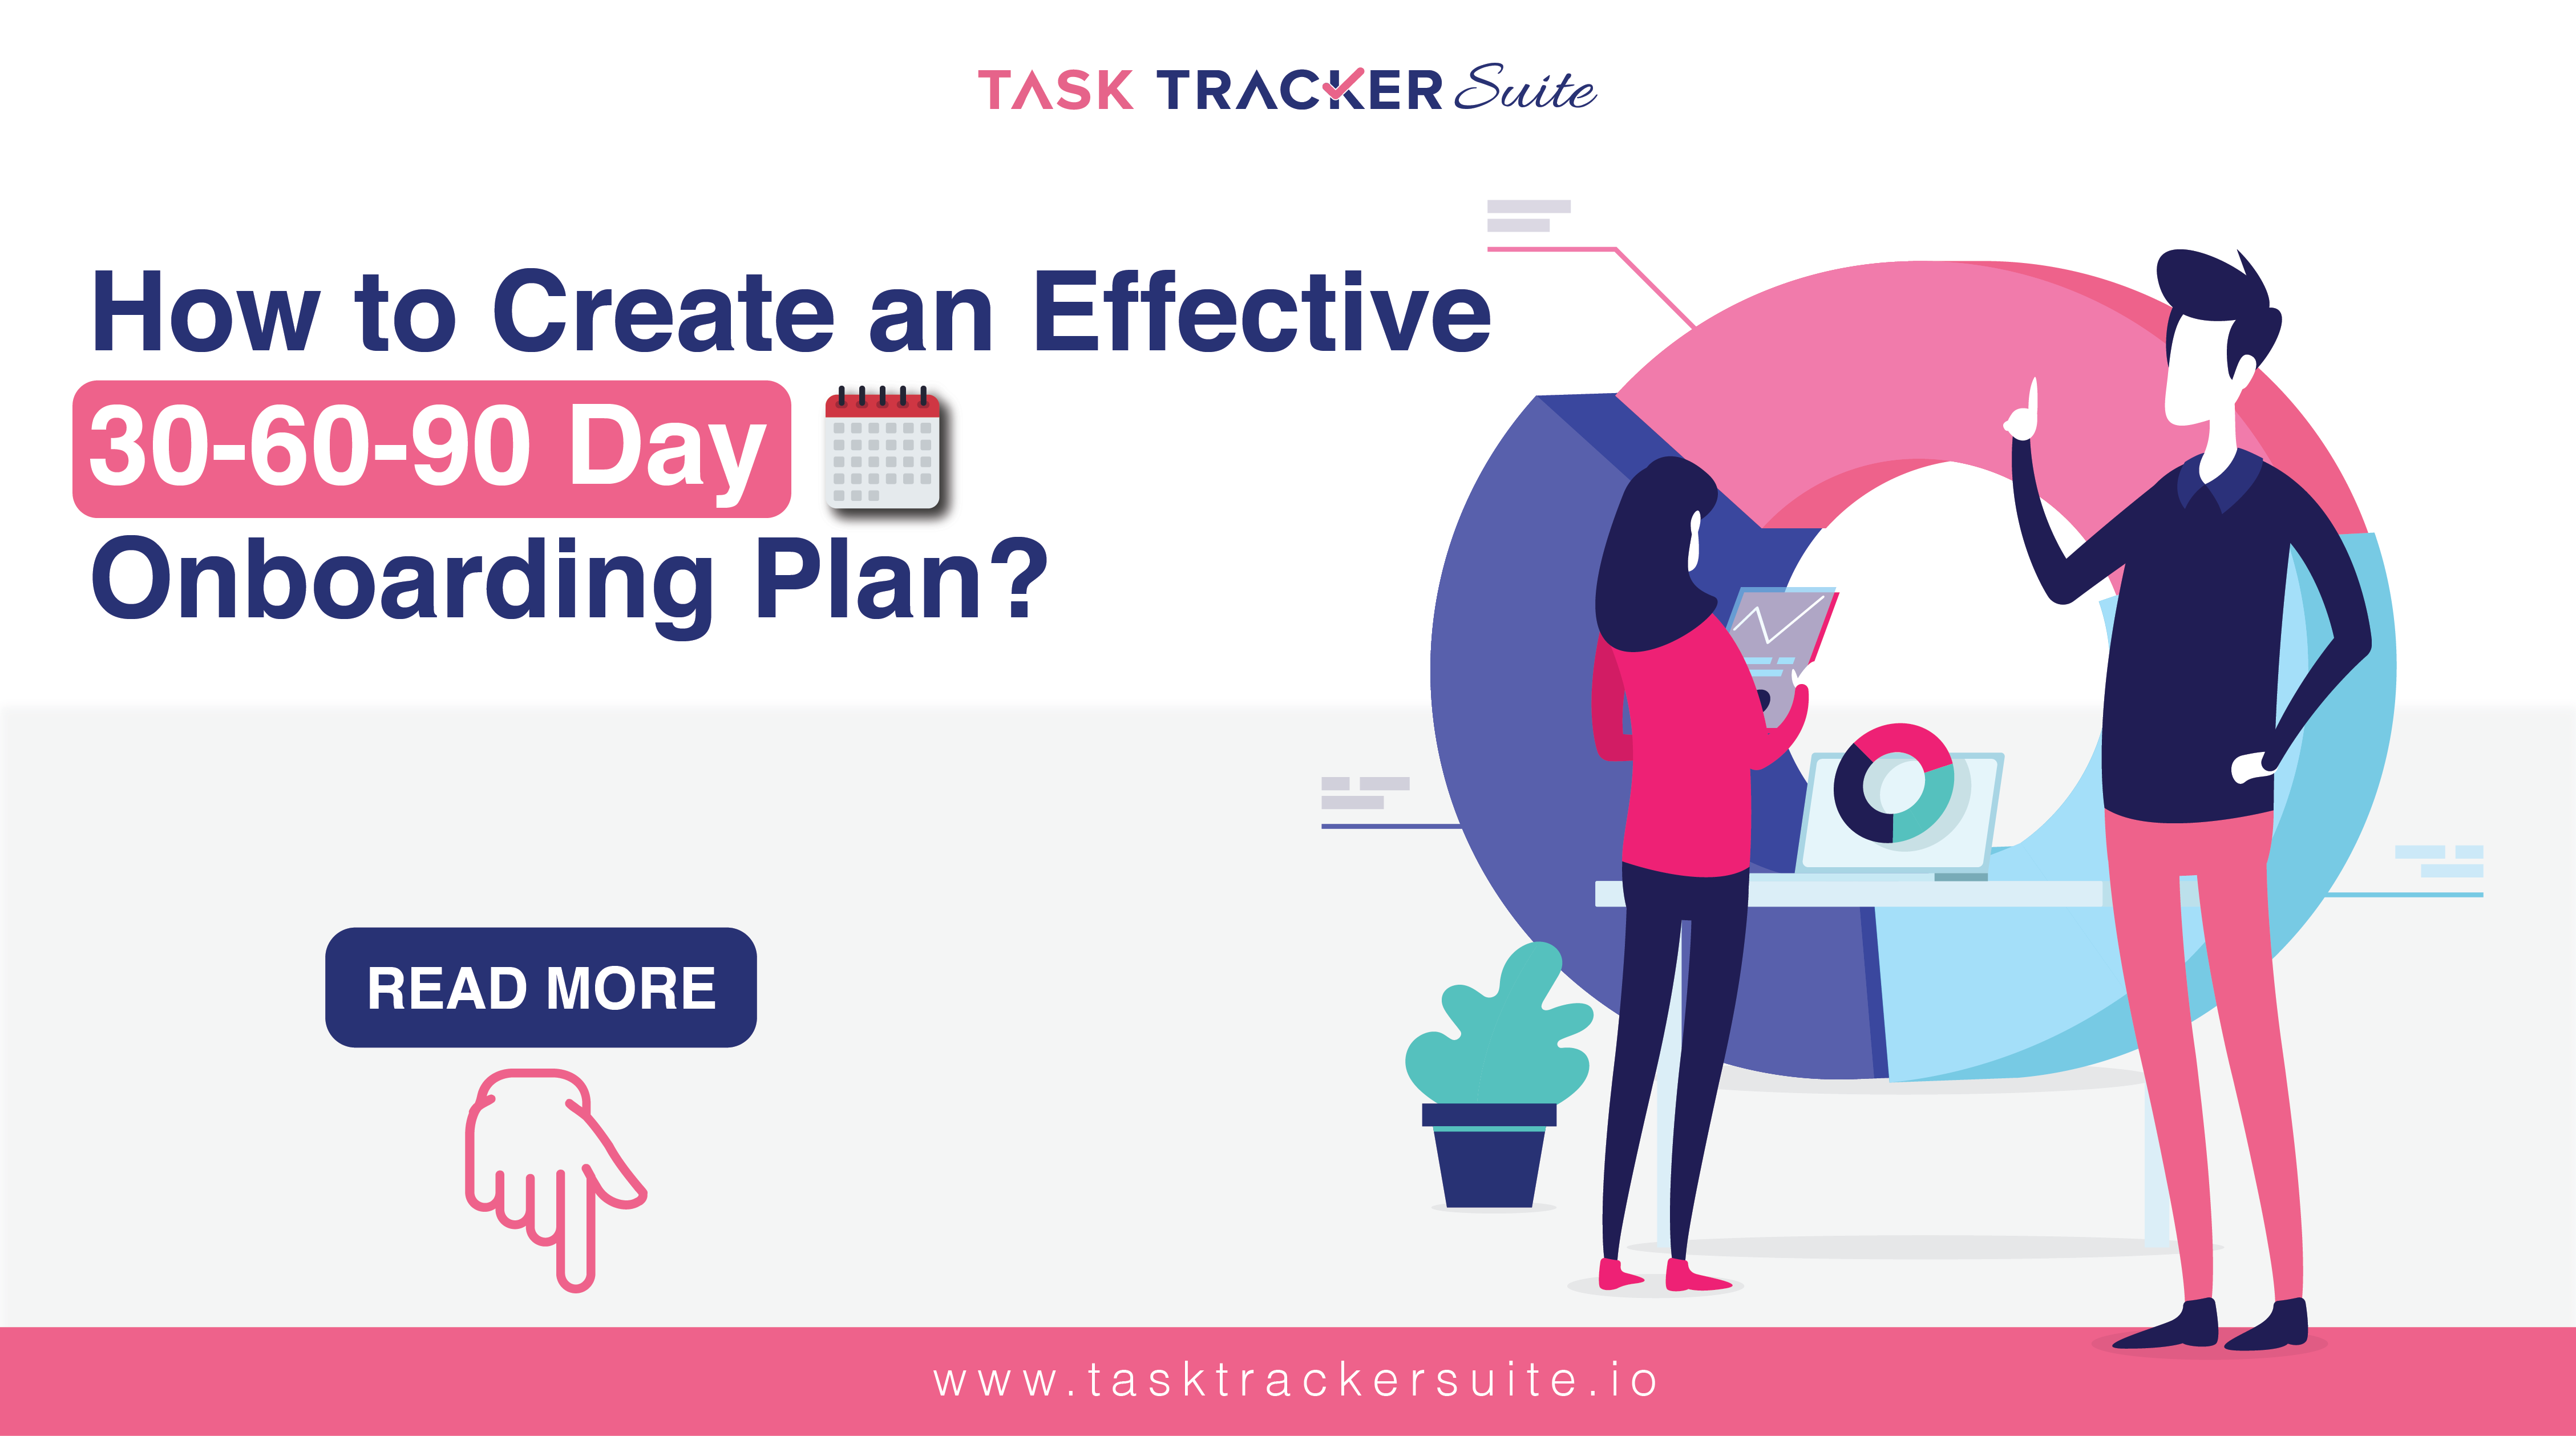 How to Create an Effective 30-60-90 Day Onboarding Plan